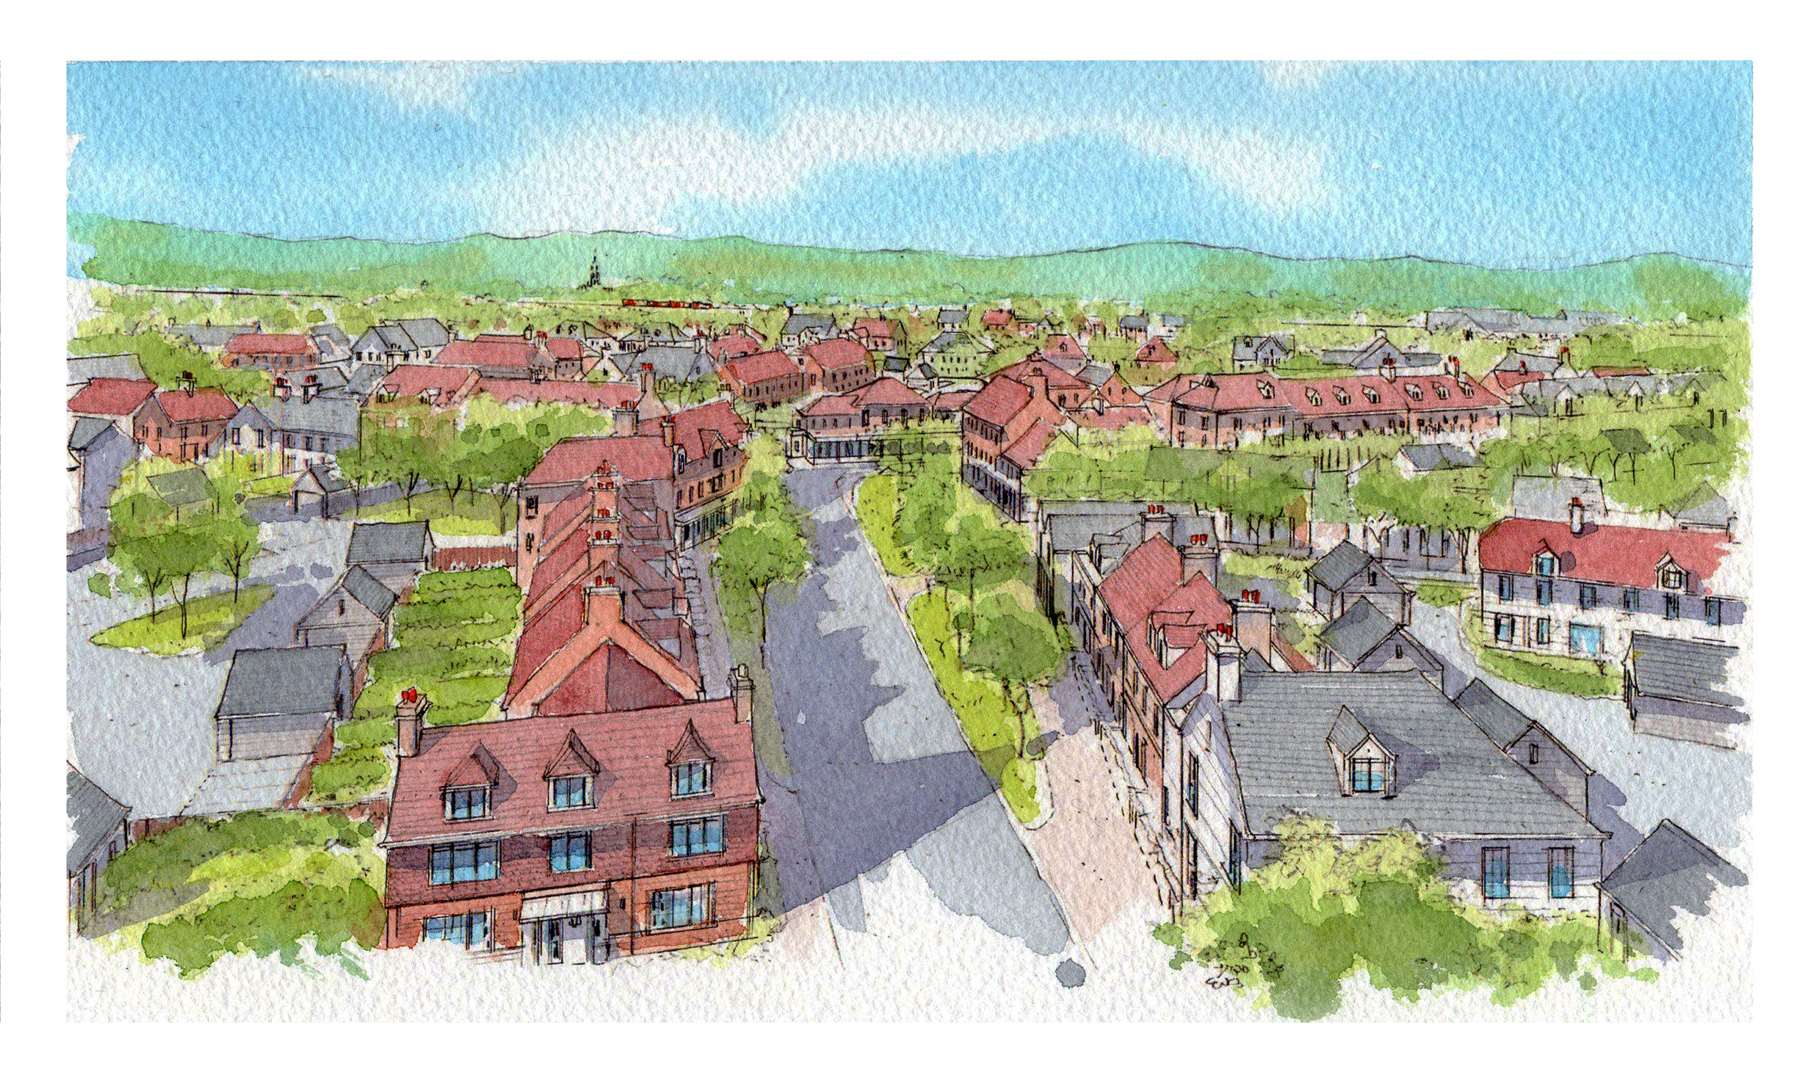 A suggestion of what the Tudeley Garden Village could look like